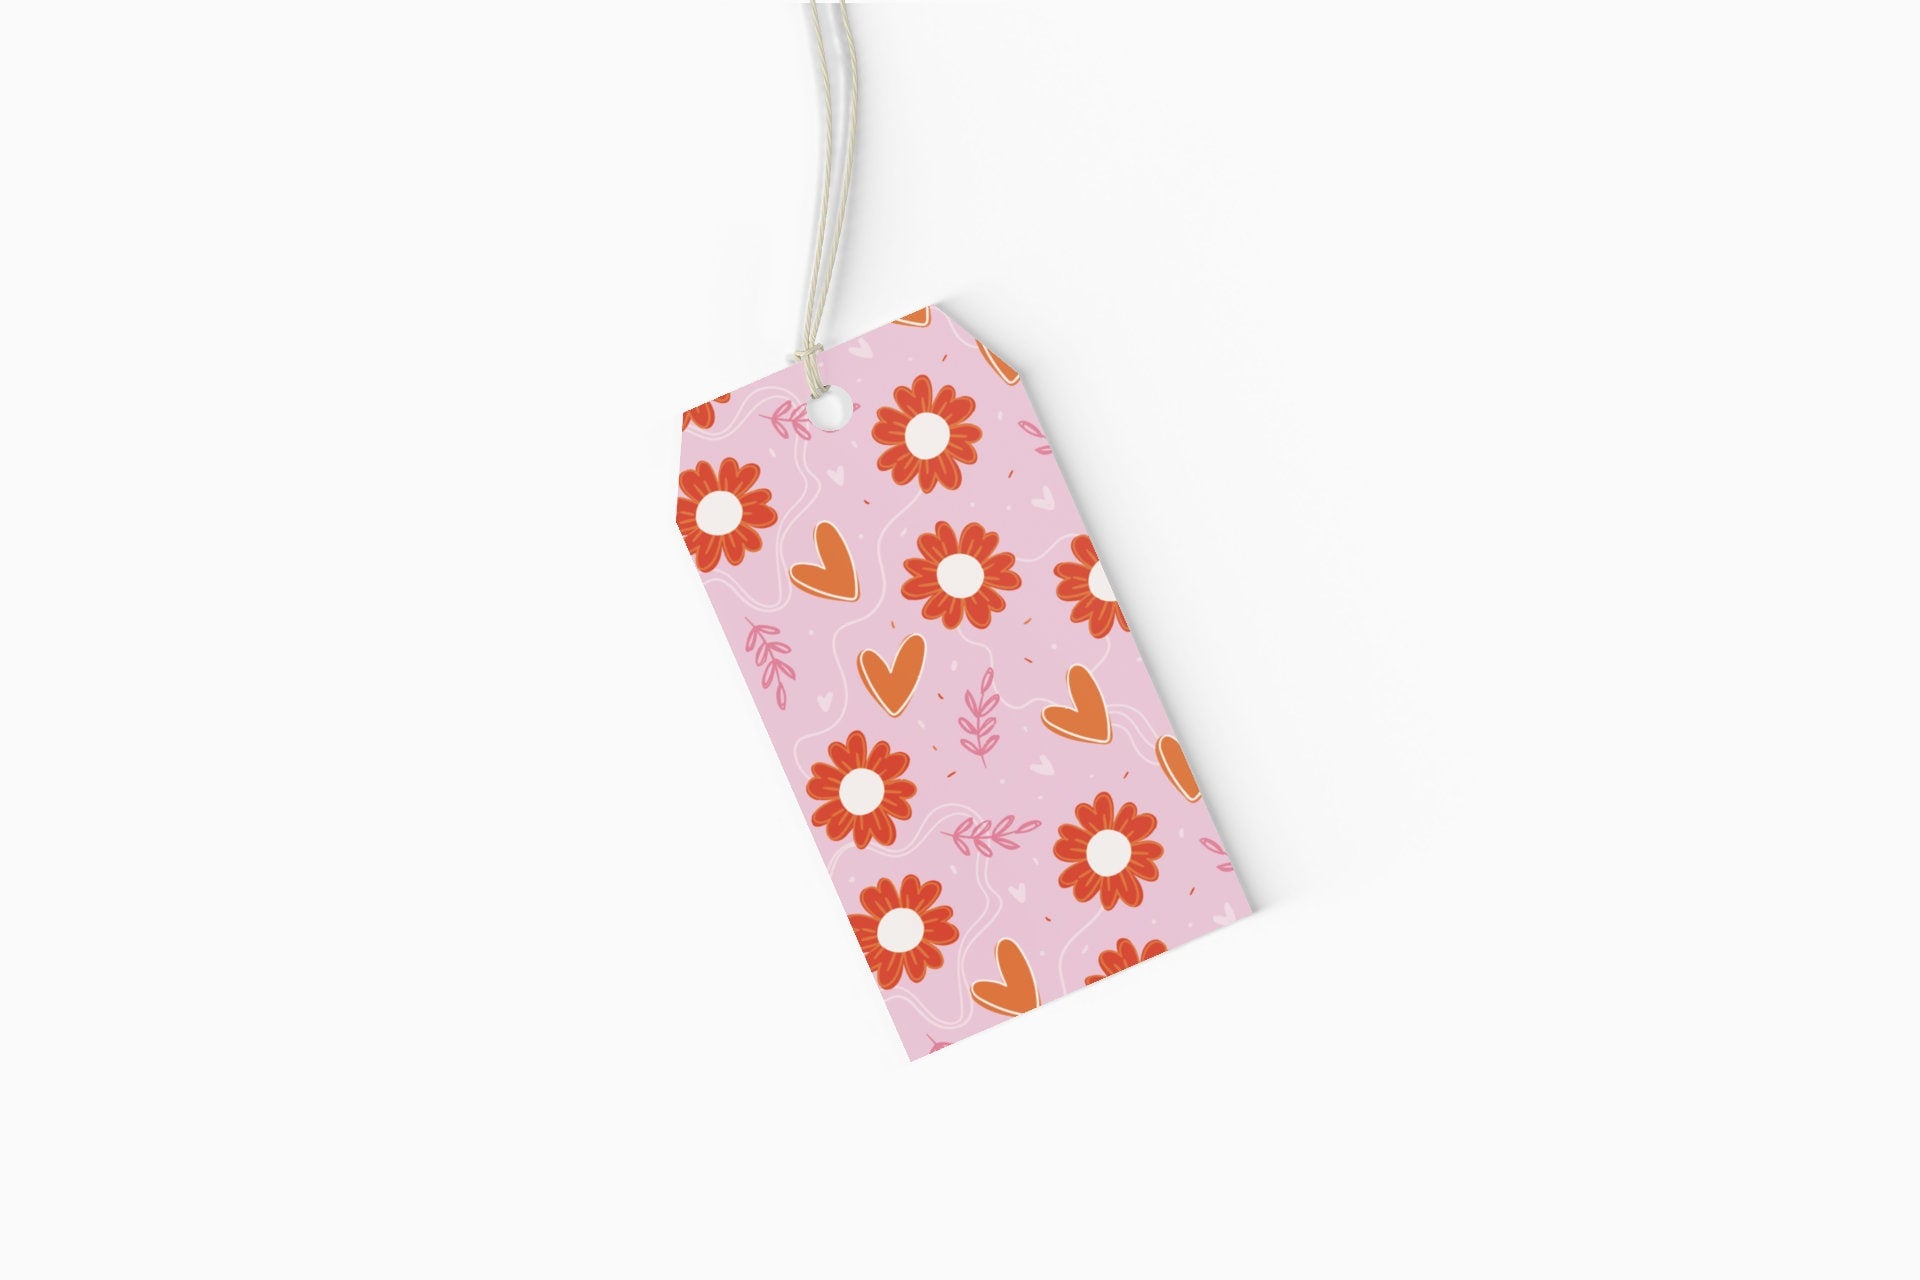 Floral Heart Gift Tags - Set of 10 Tags